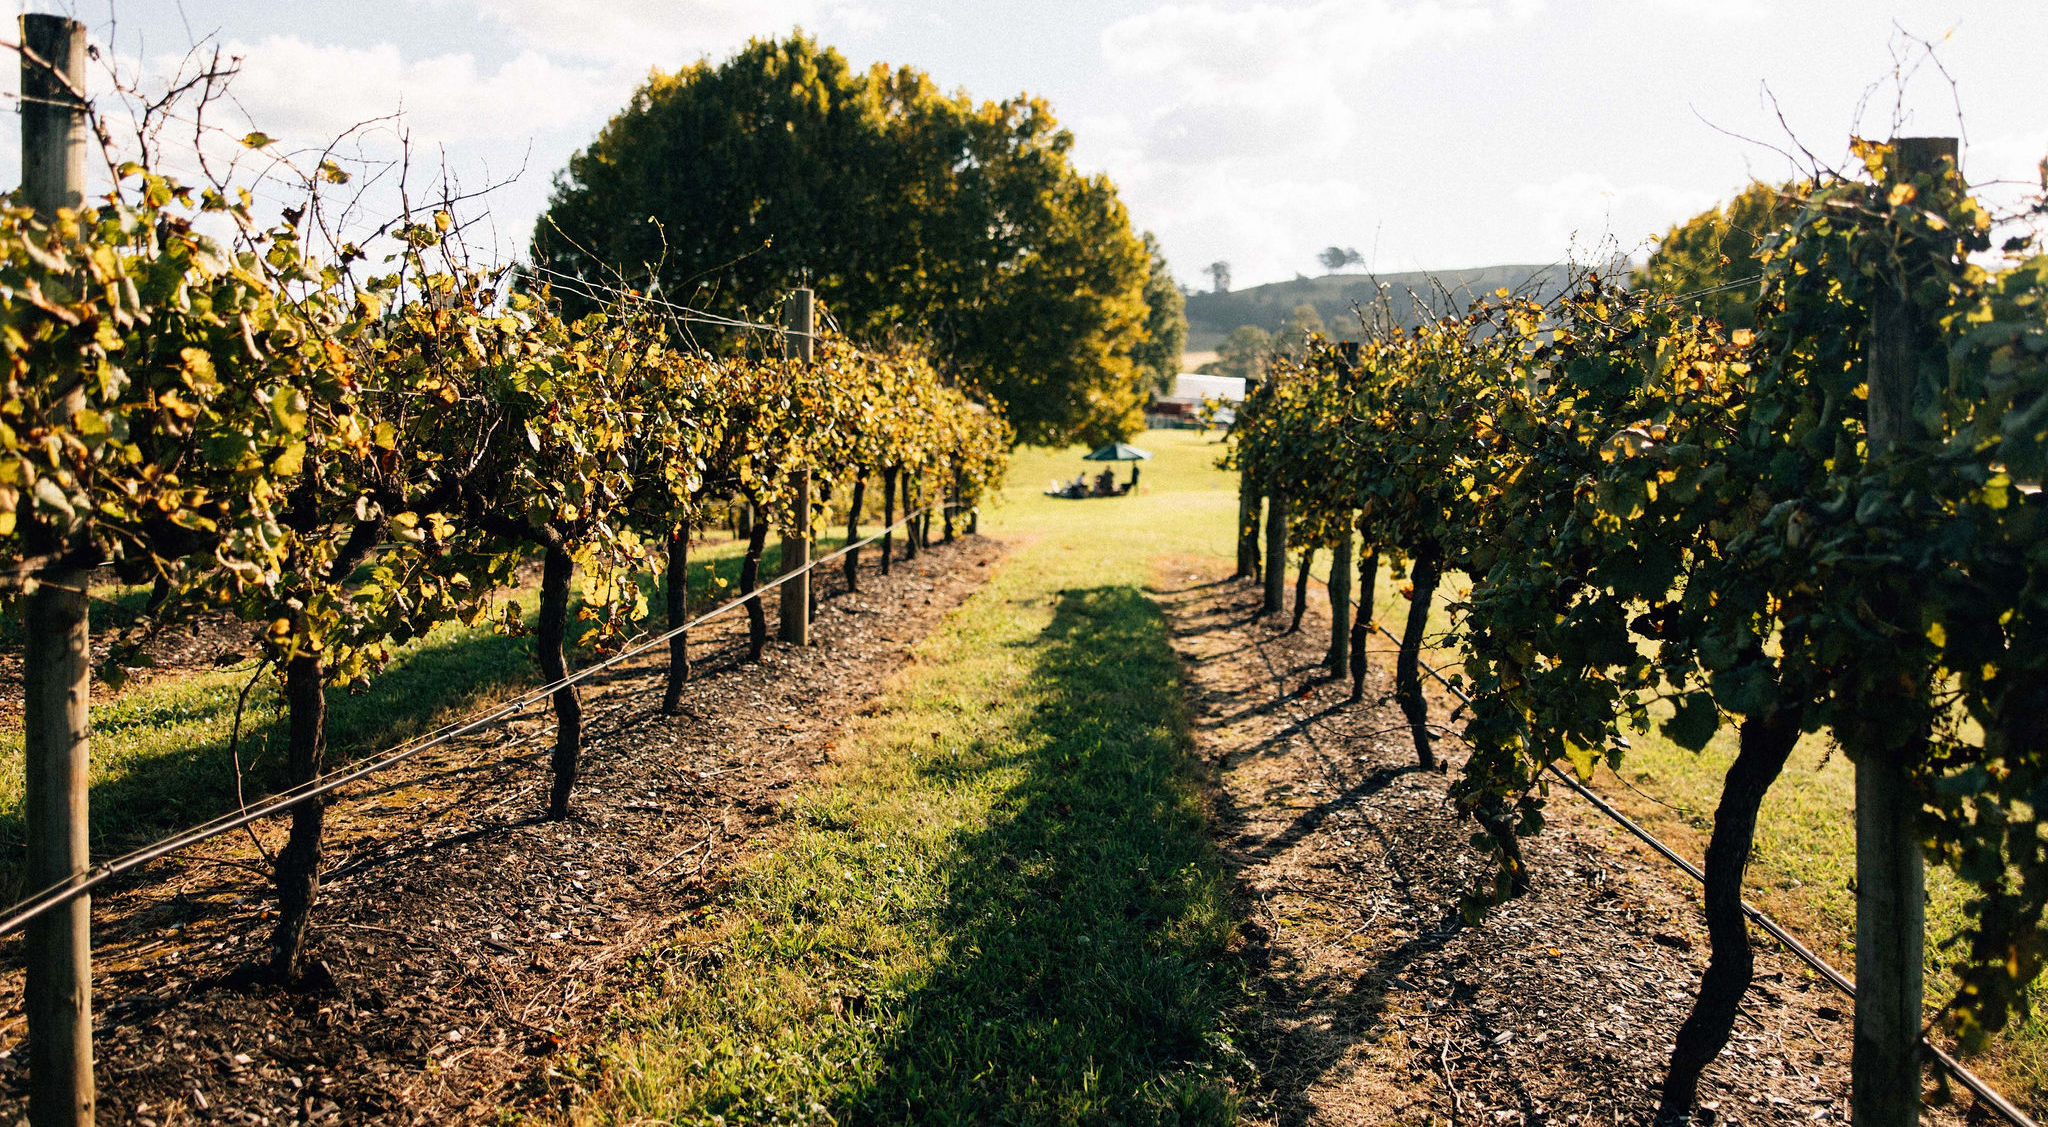 Boydell’s Annual Picnic in the Vines Returns this October